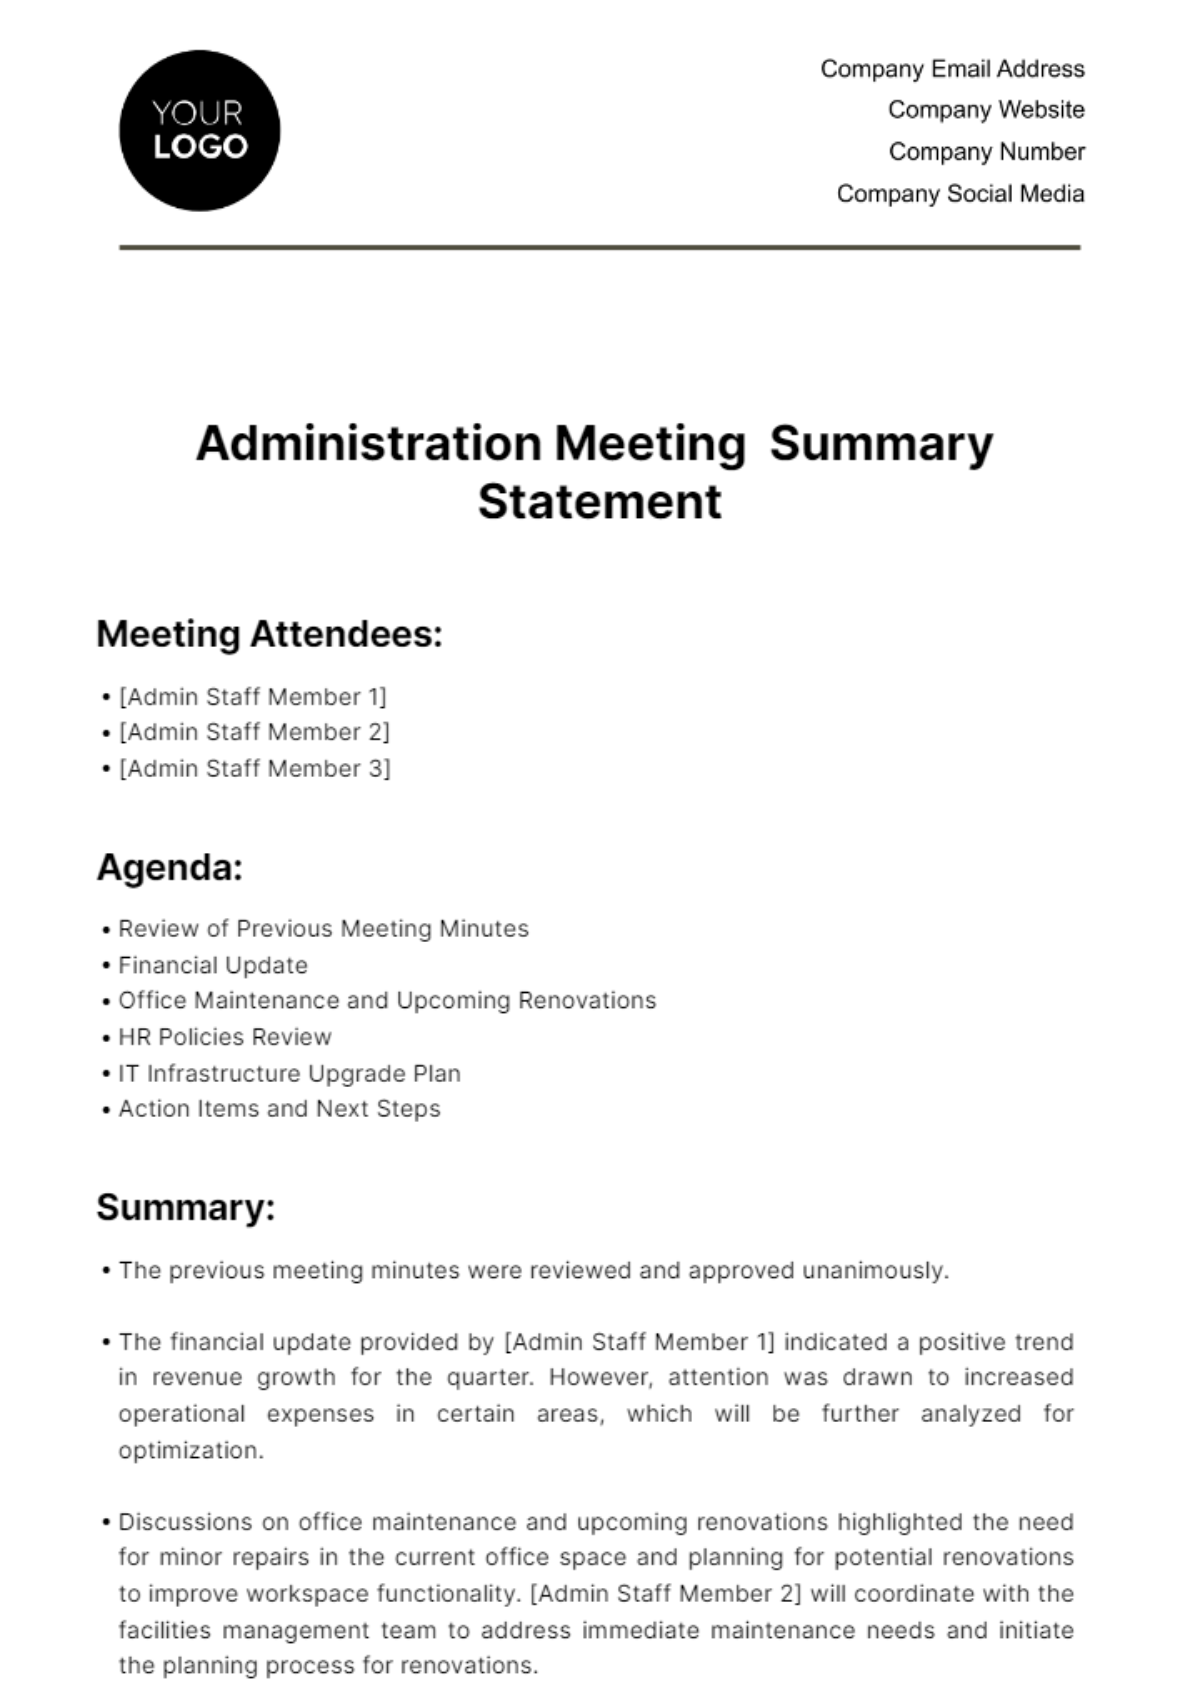 Administration Meeting Summary Statement Template